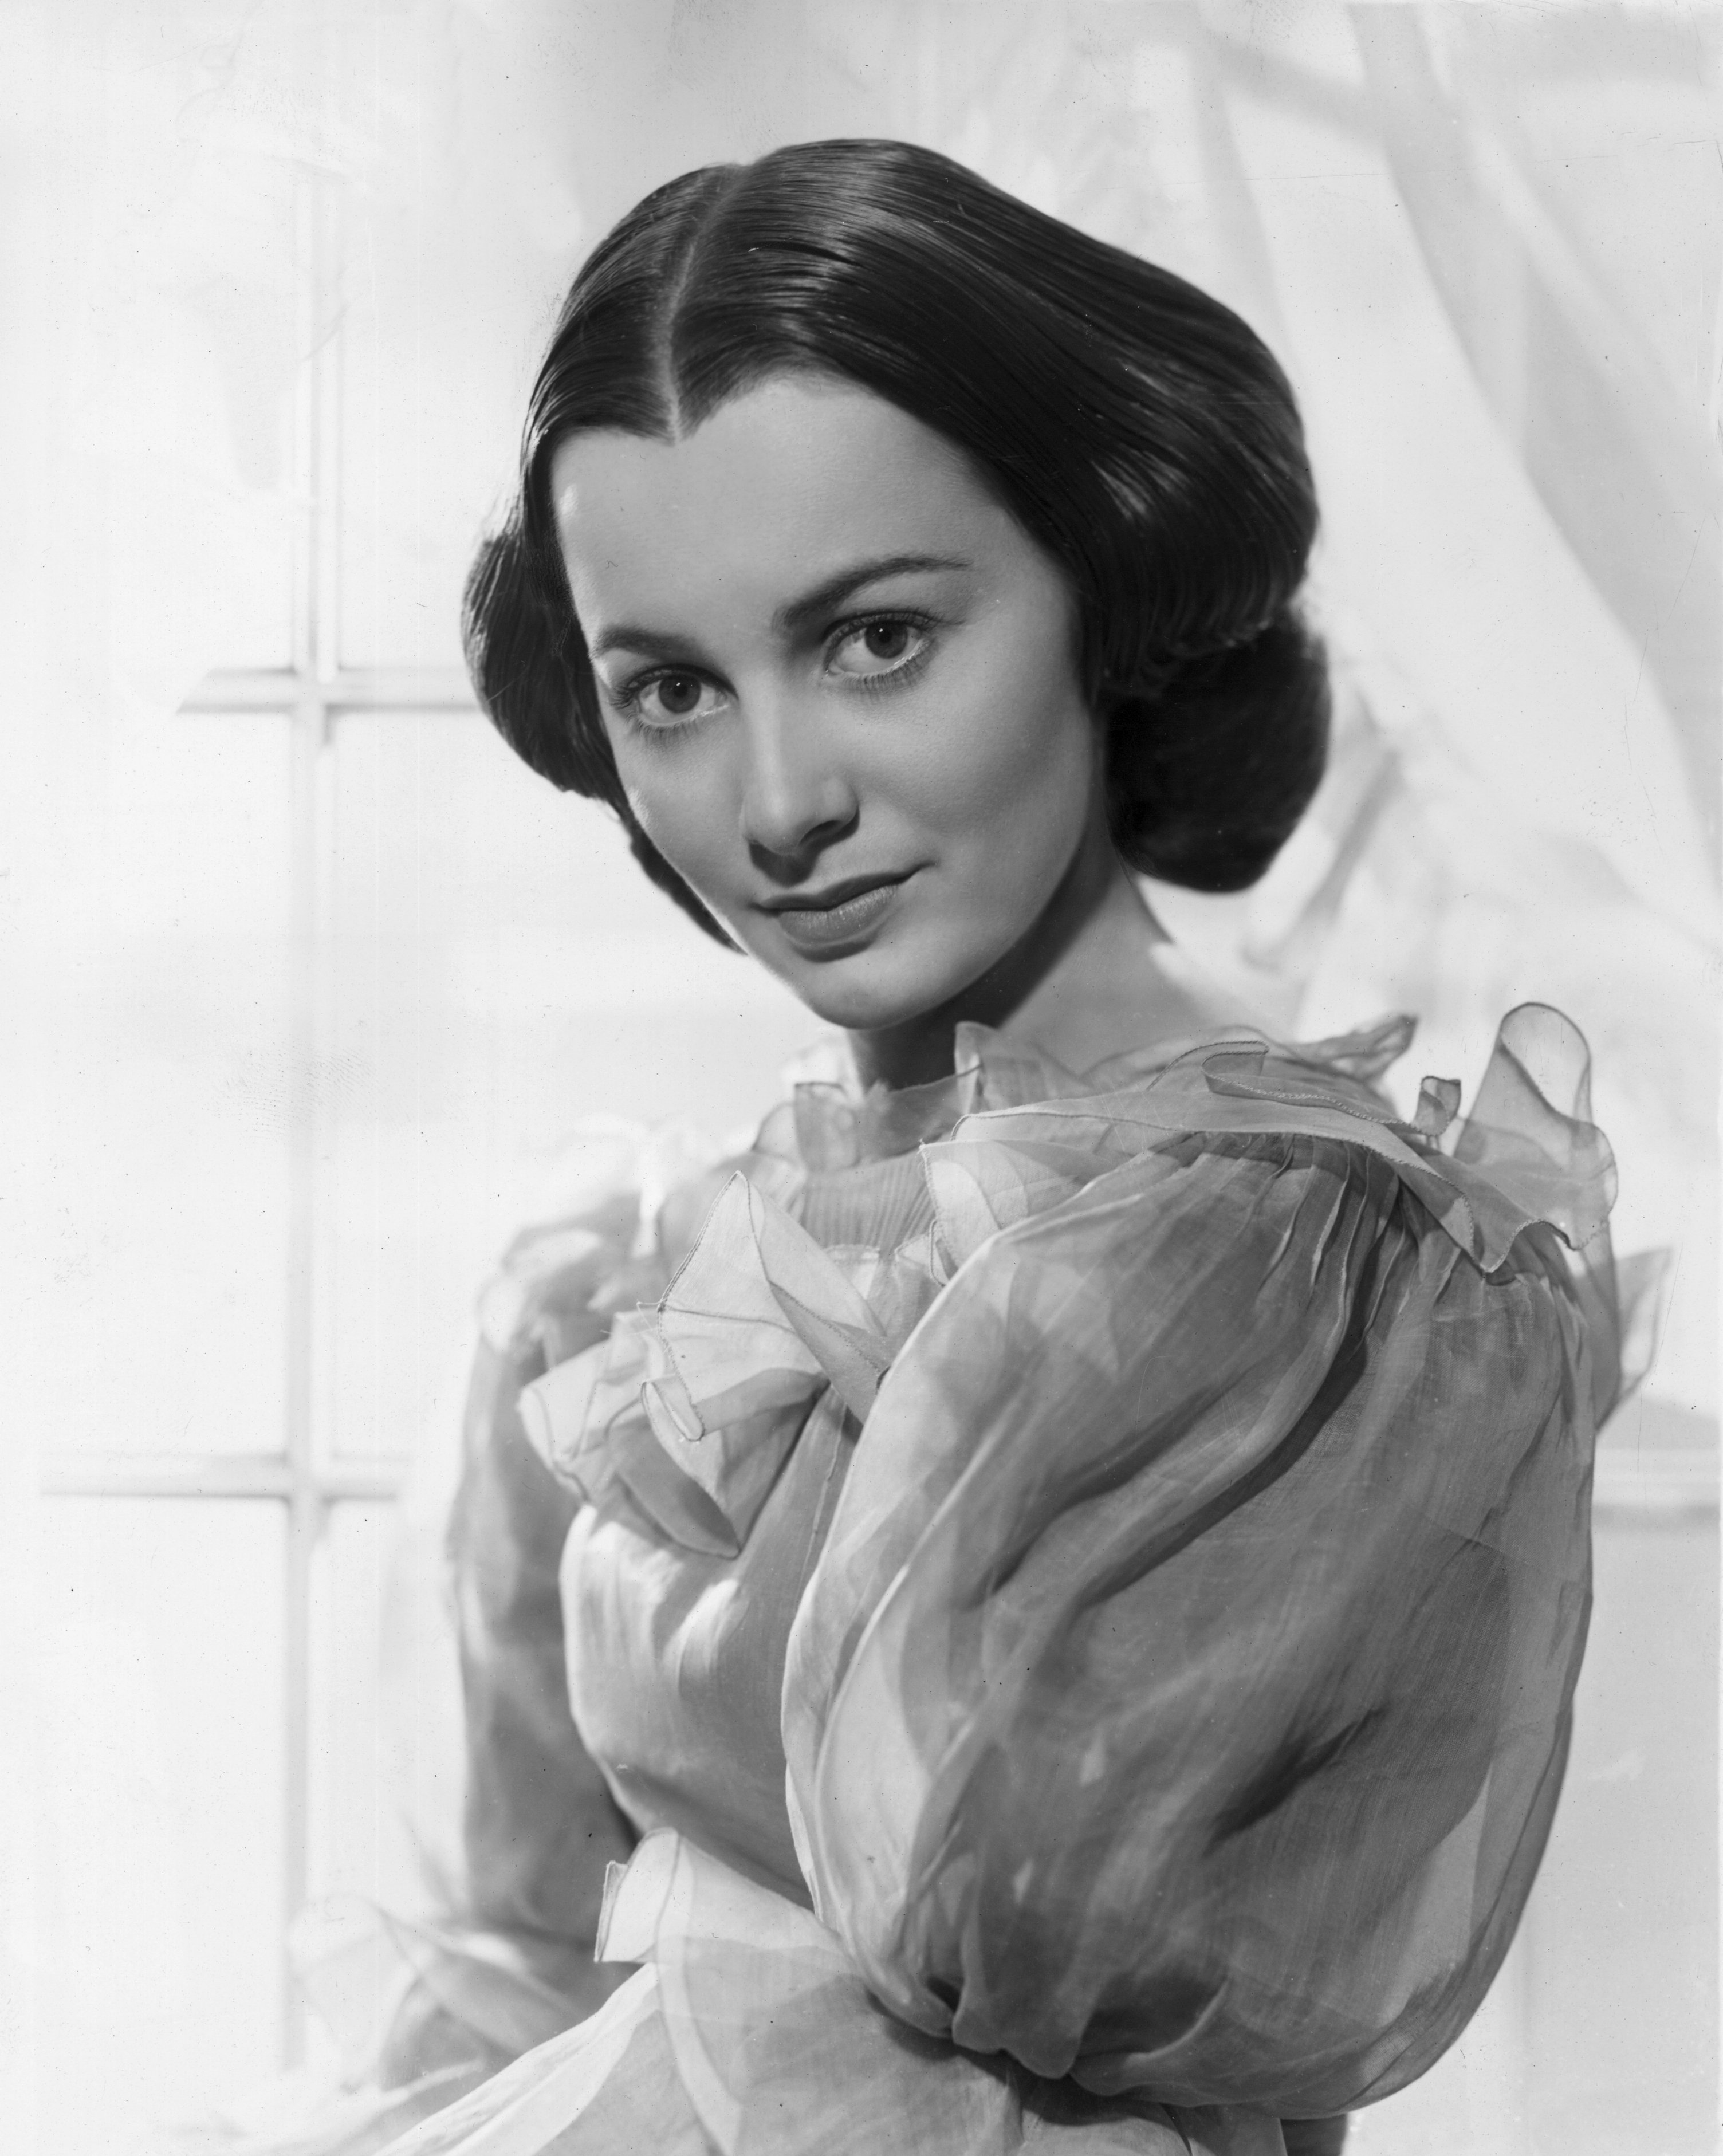 circa 1939: Promotional studio portrait of American actor Olivia de Havilland, standing in front of a window in a promotional portrait for 'Gone With The Wind'. She wears a gown, with her hair parted and pulled back. | Source: Getty Images